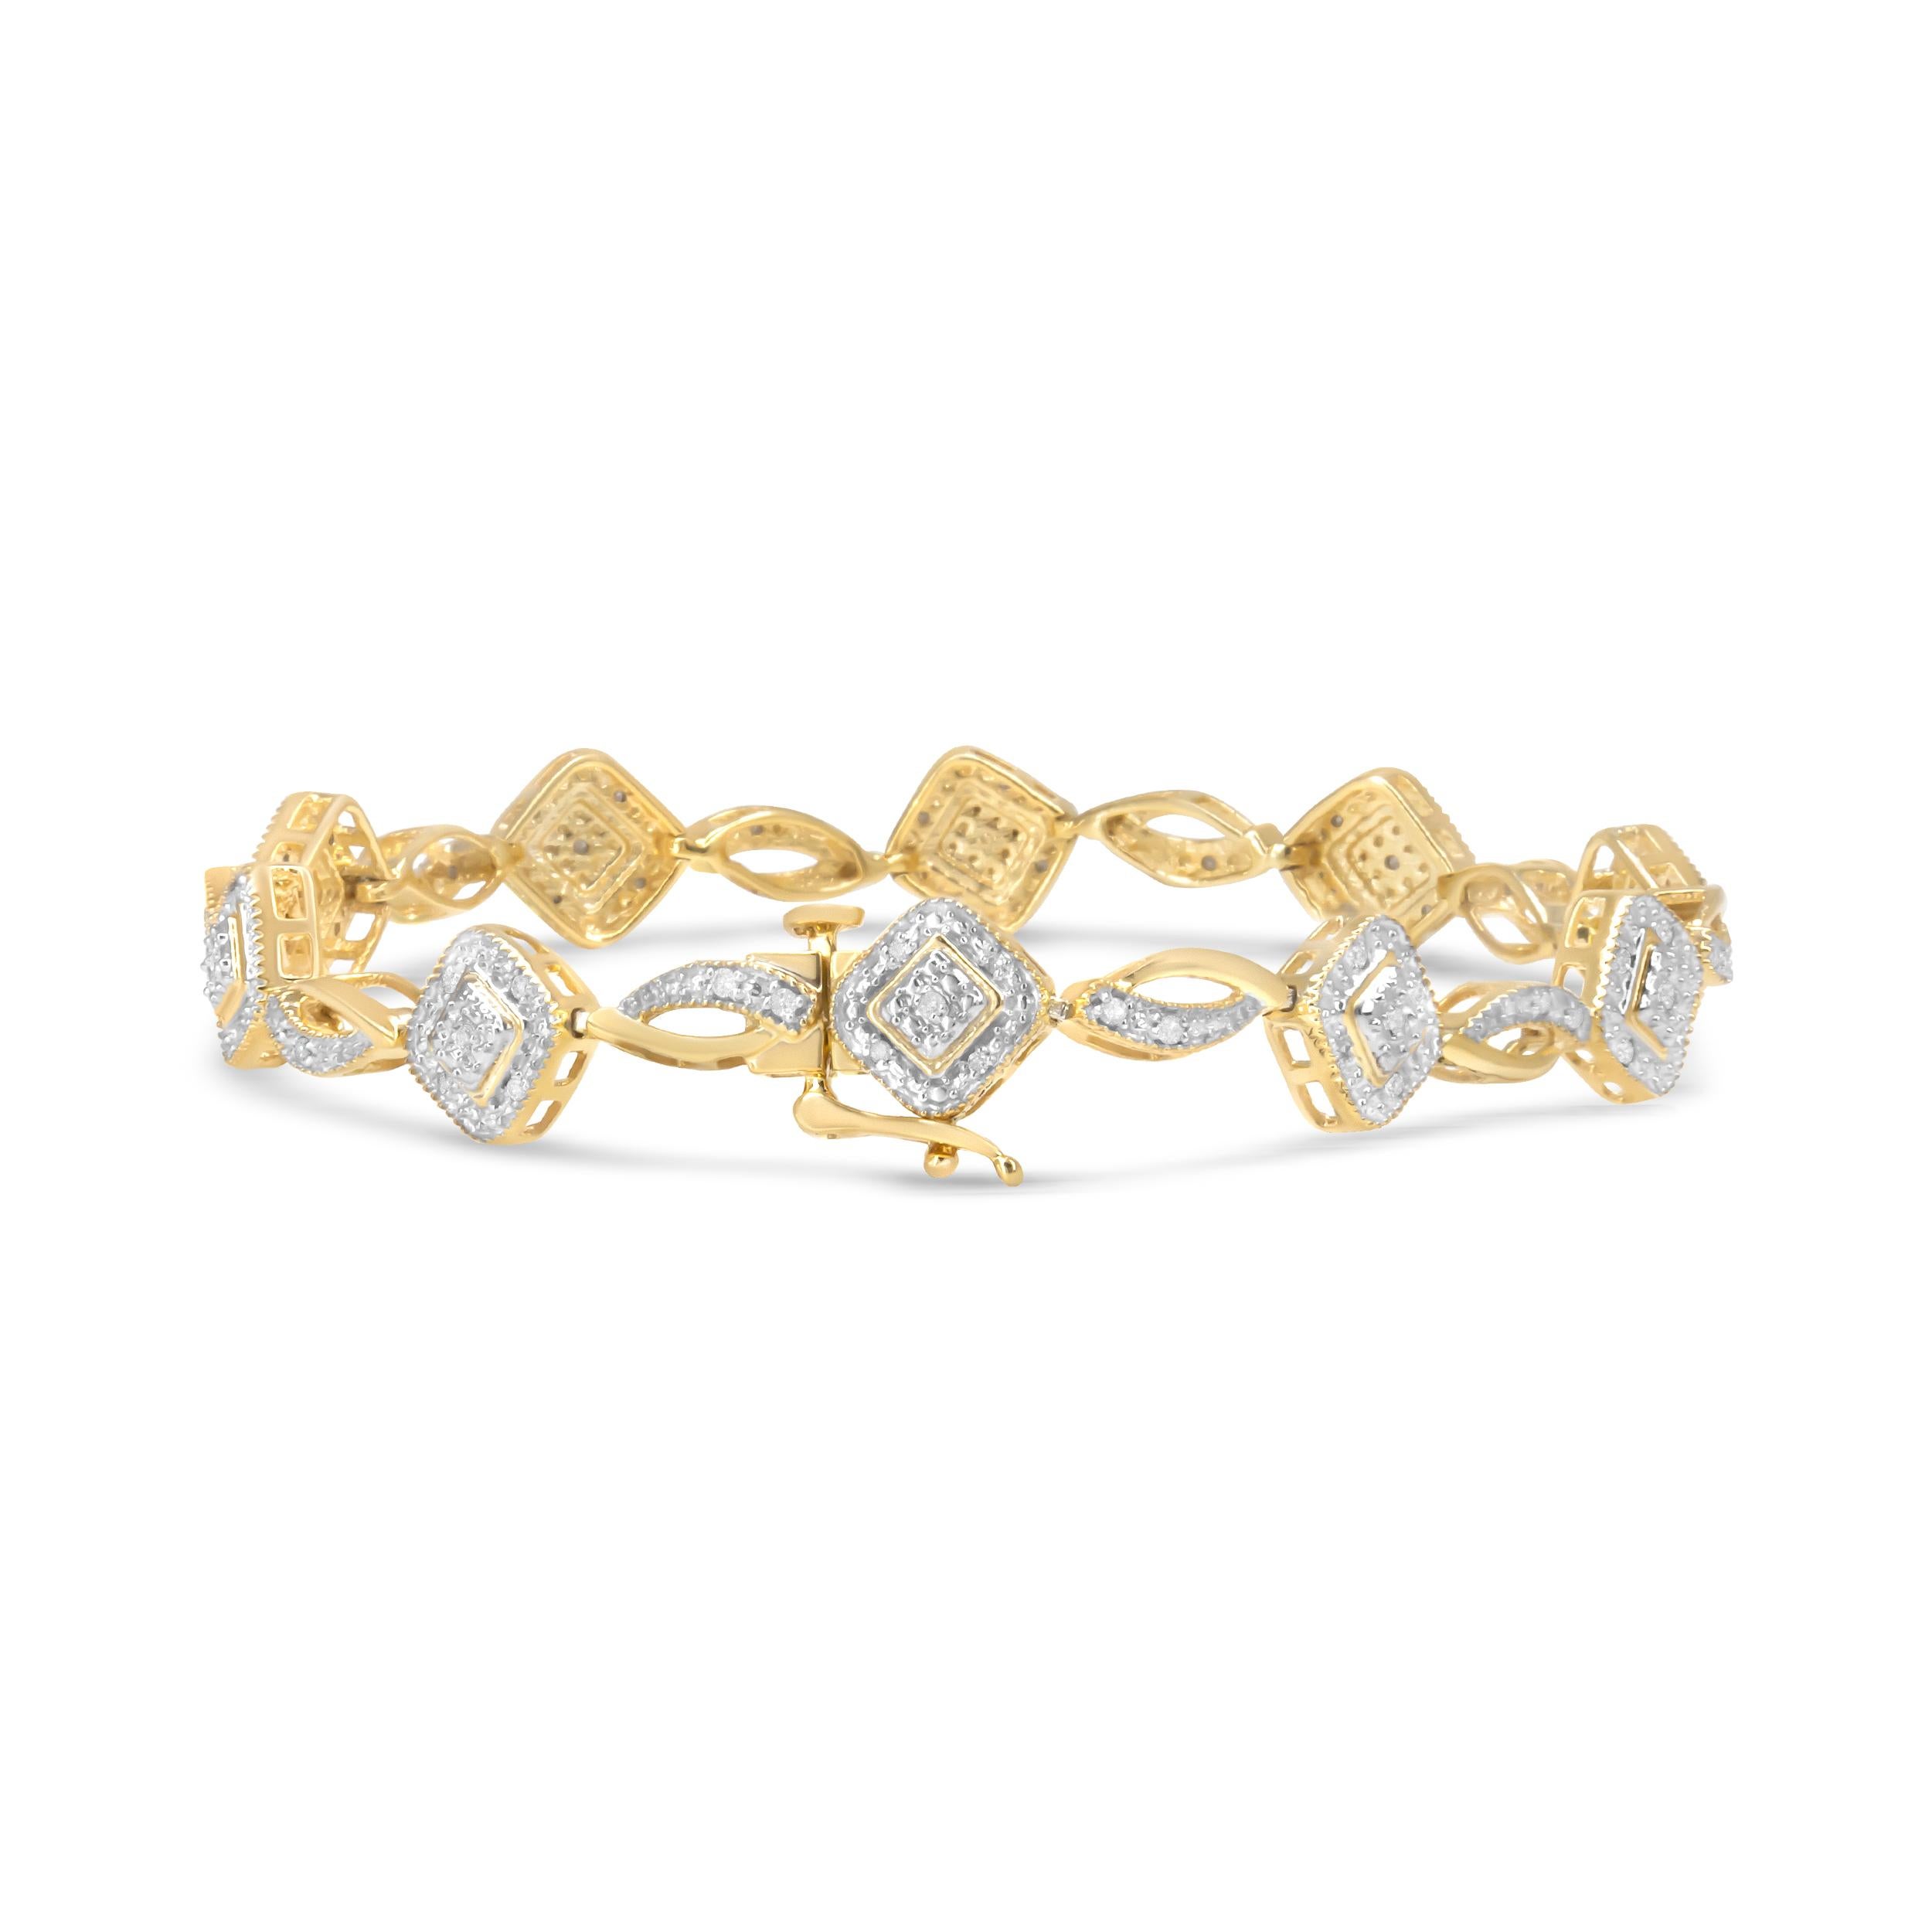 A modern design with an art deco twist, this striking silver link bracelet is coated with the most luxurious 10k yellow gold. The uniquely shaped gold links are set with a natural, round-cut diamonds in a classic prong setting. This bracelet shines